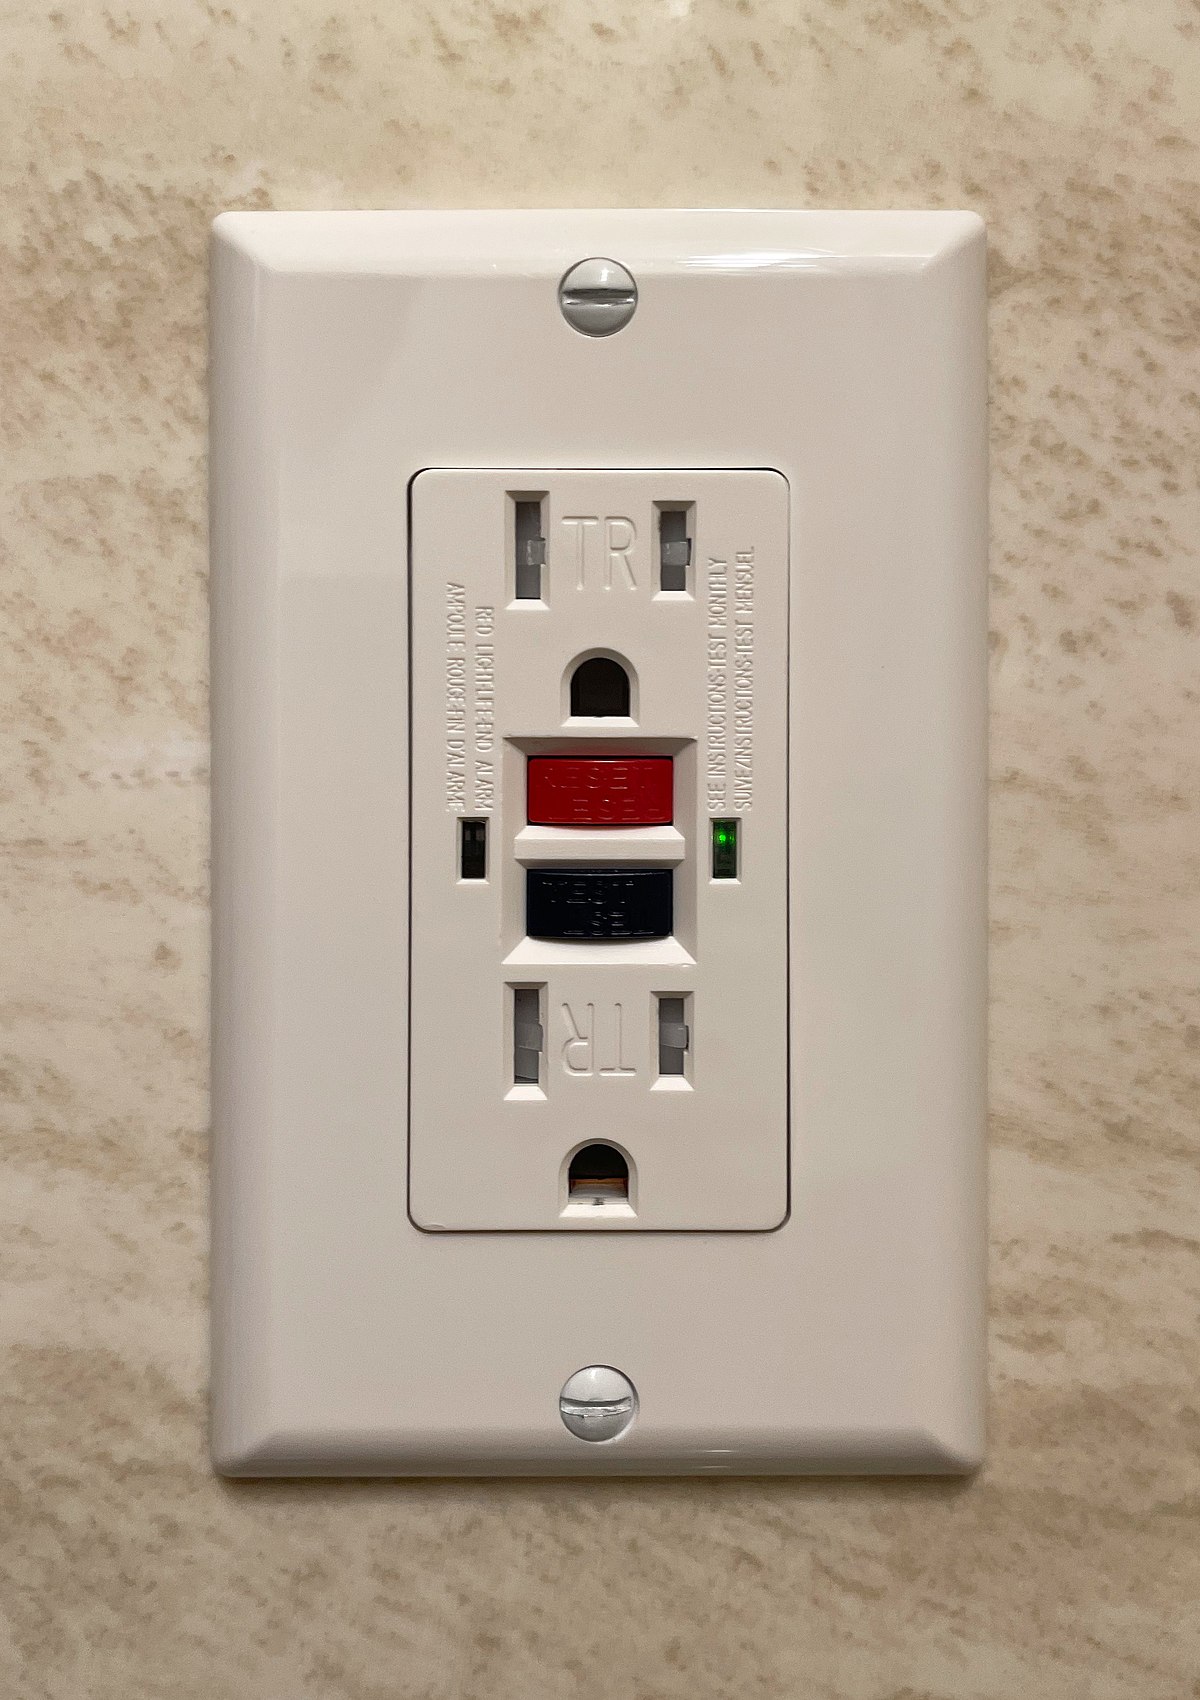 Make sure the power outlet is working by plugging in another device.
Ensure the outlet provides enough power by using a different outlet with a higher amperage rating.